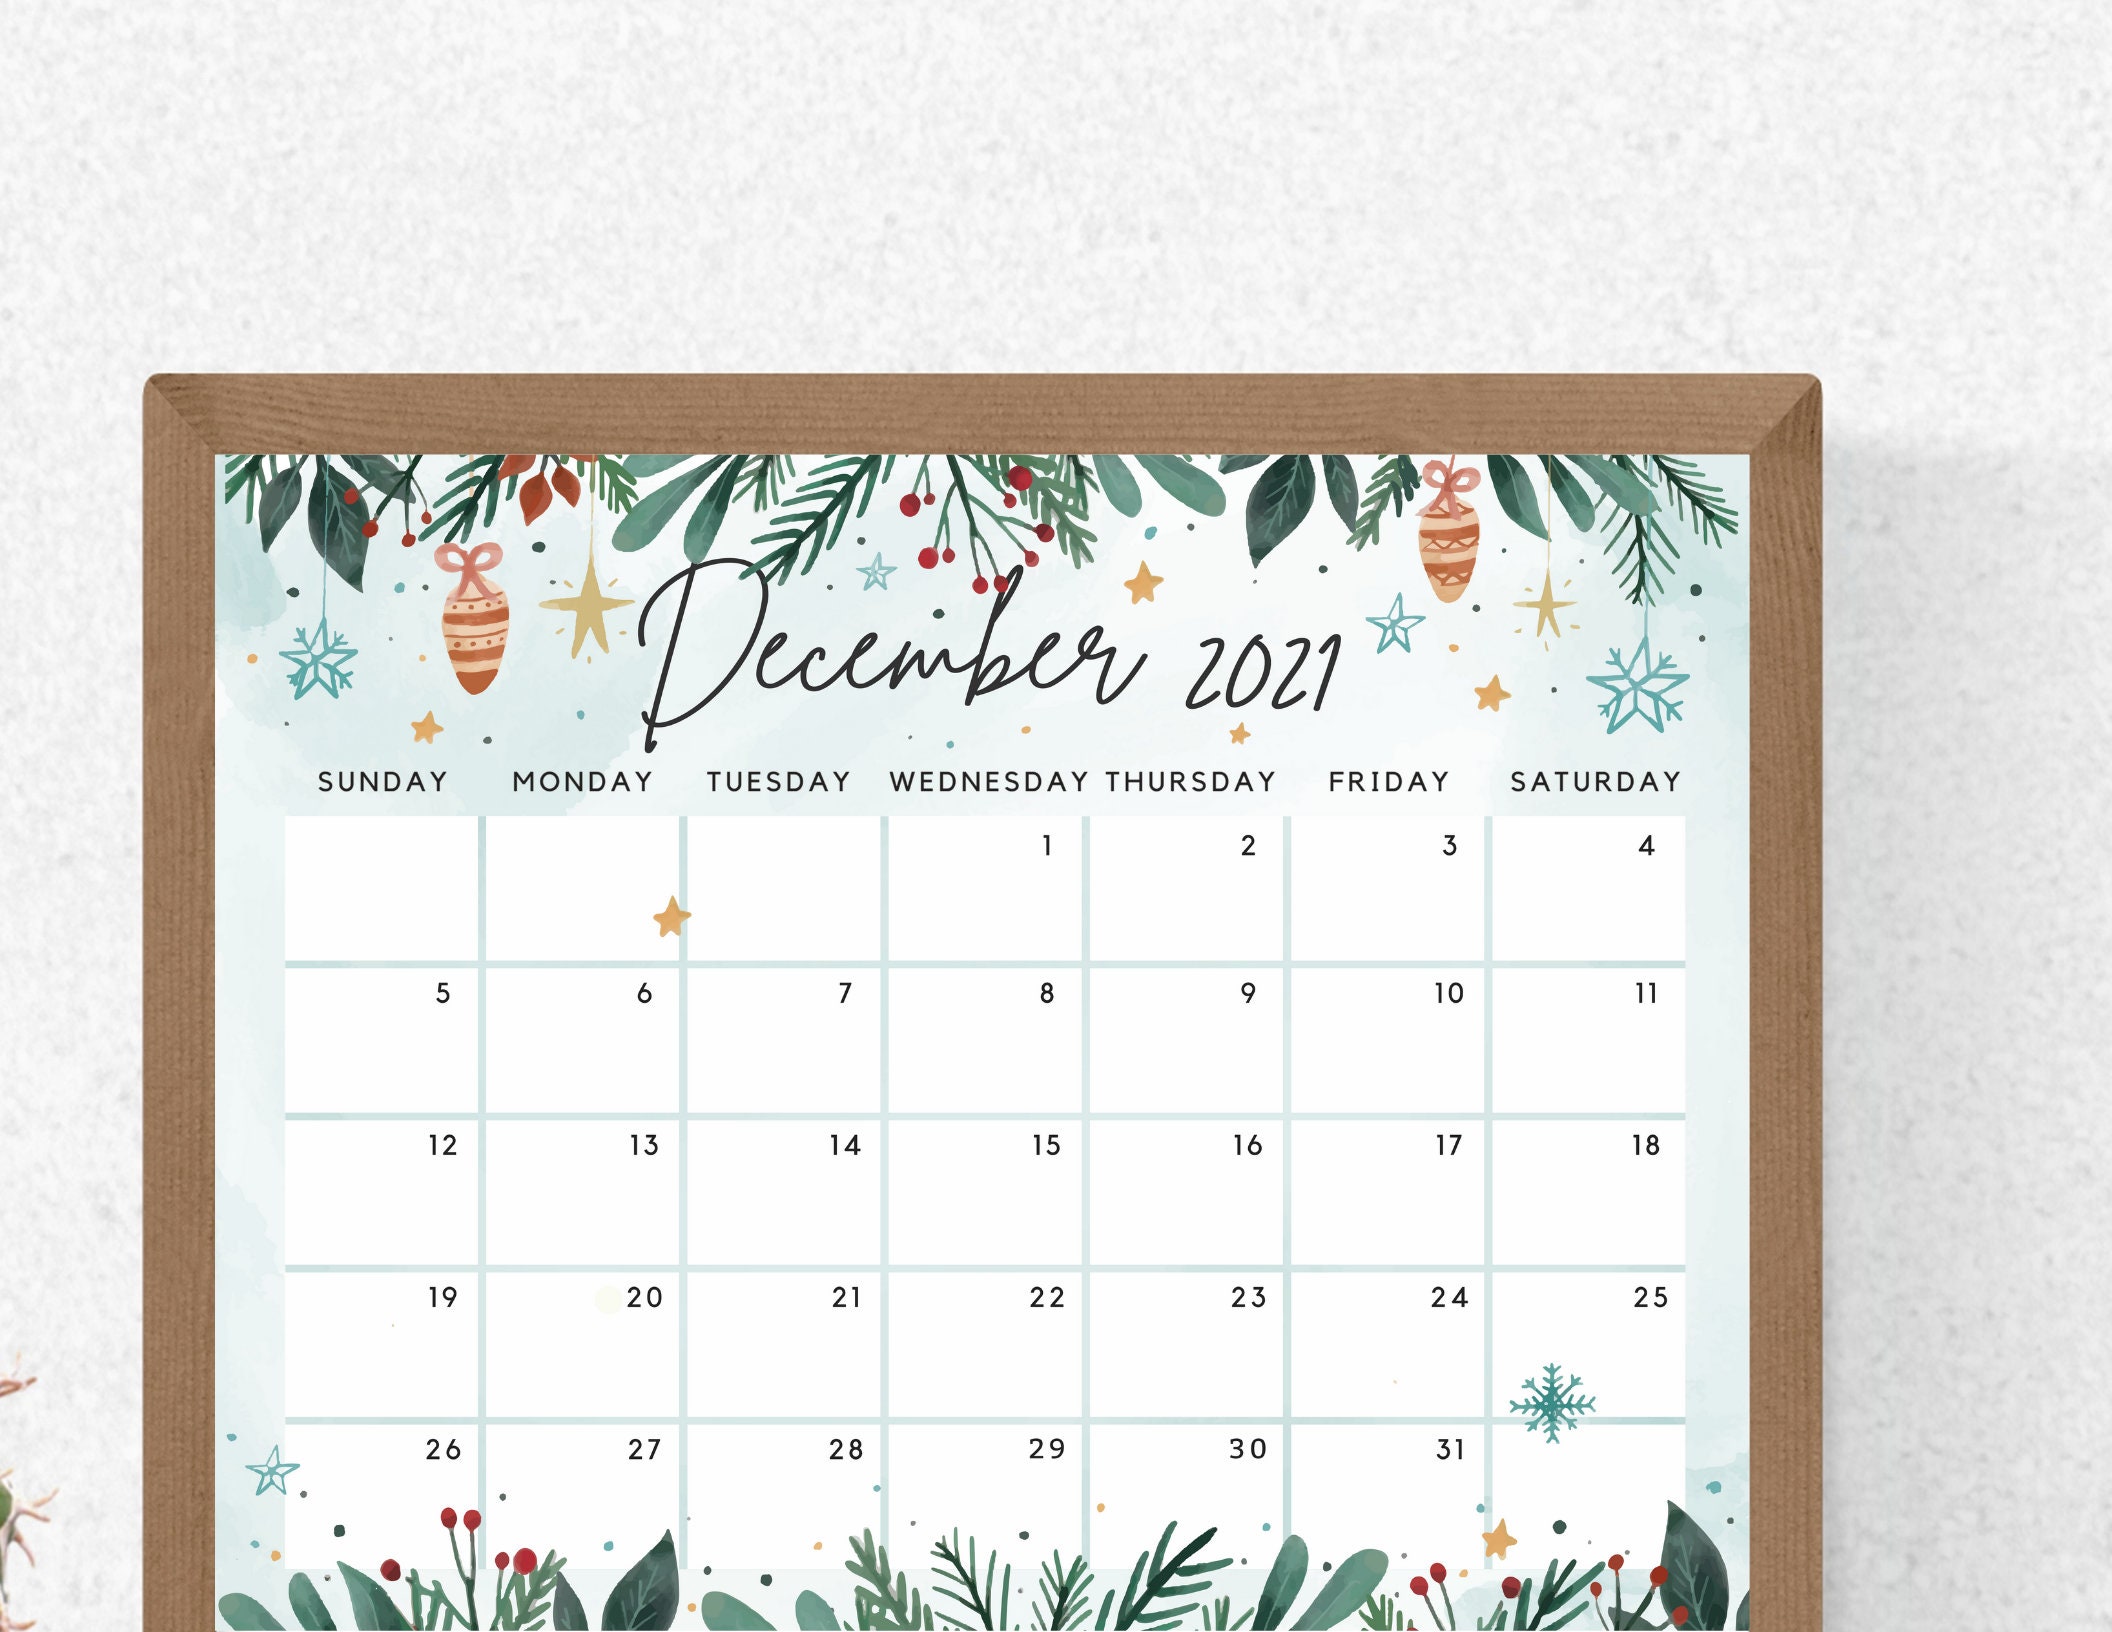 December 2021 Calendar Beautiful Winter White Christmas with Etsy